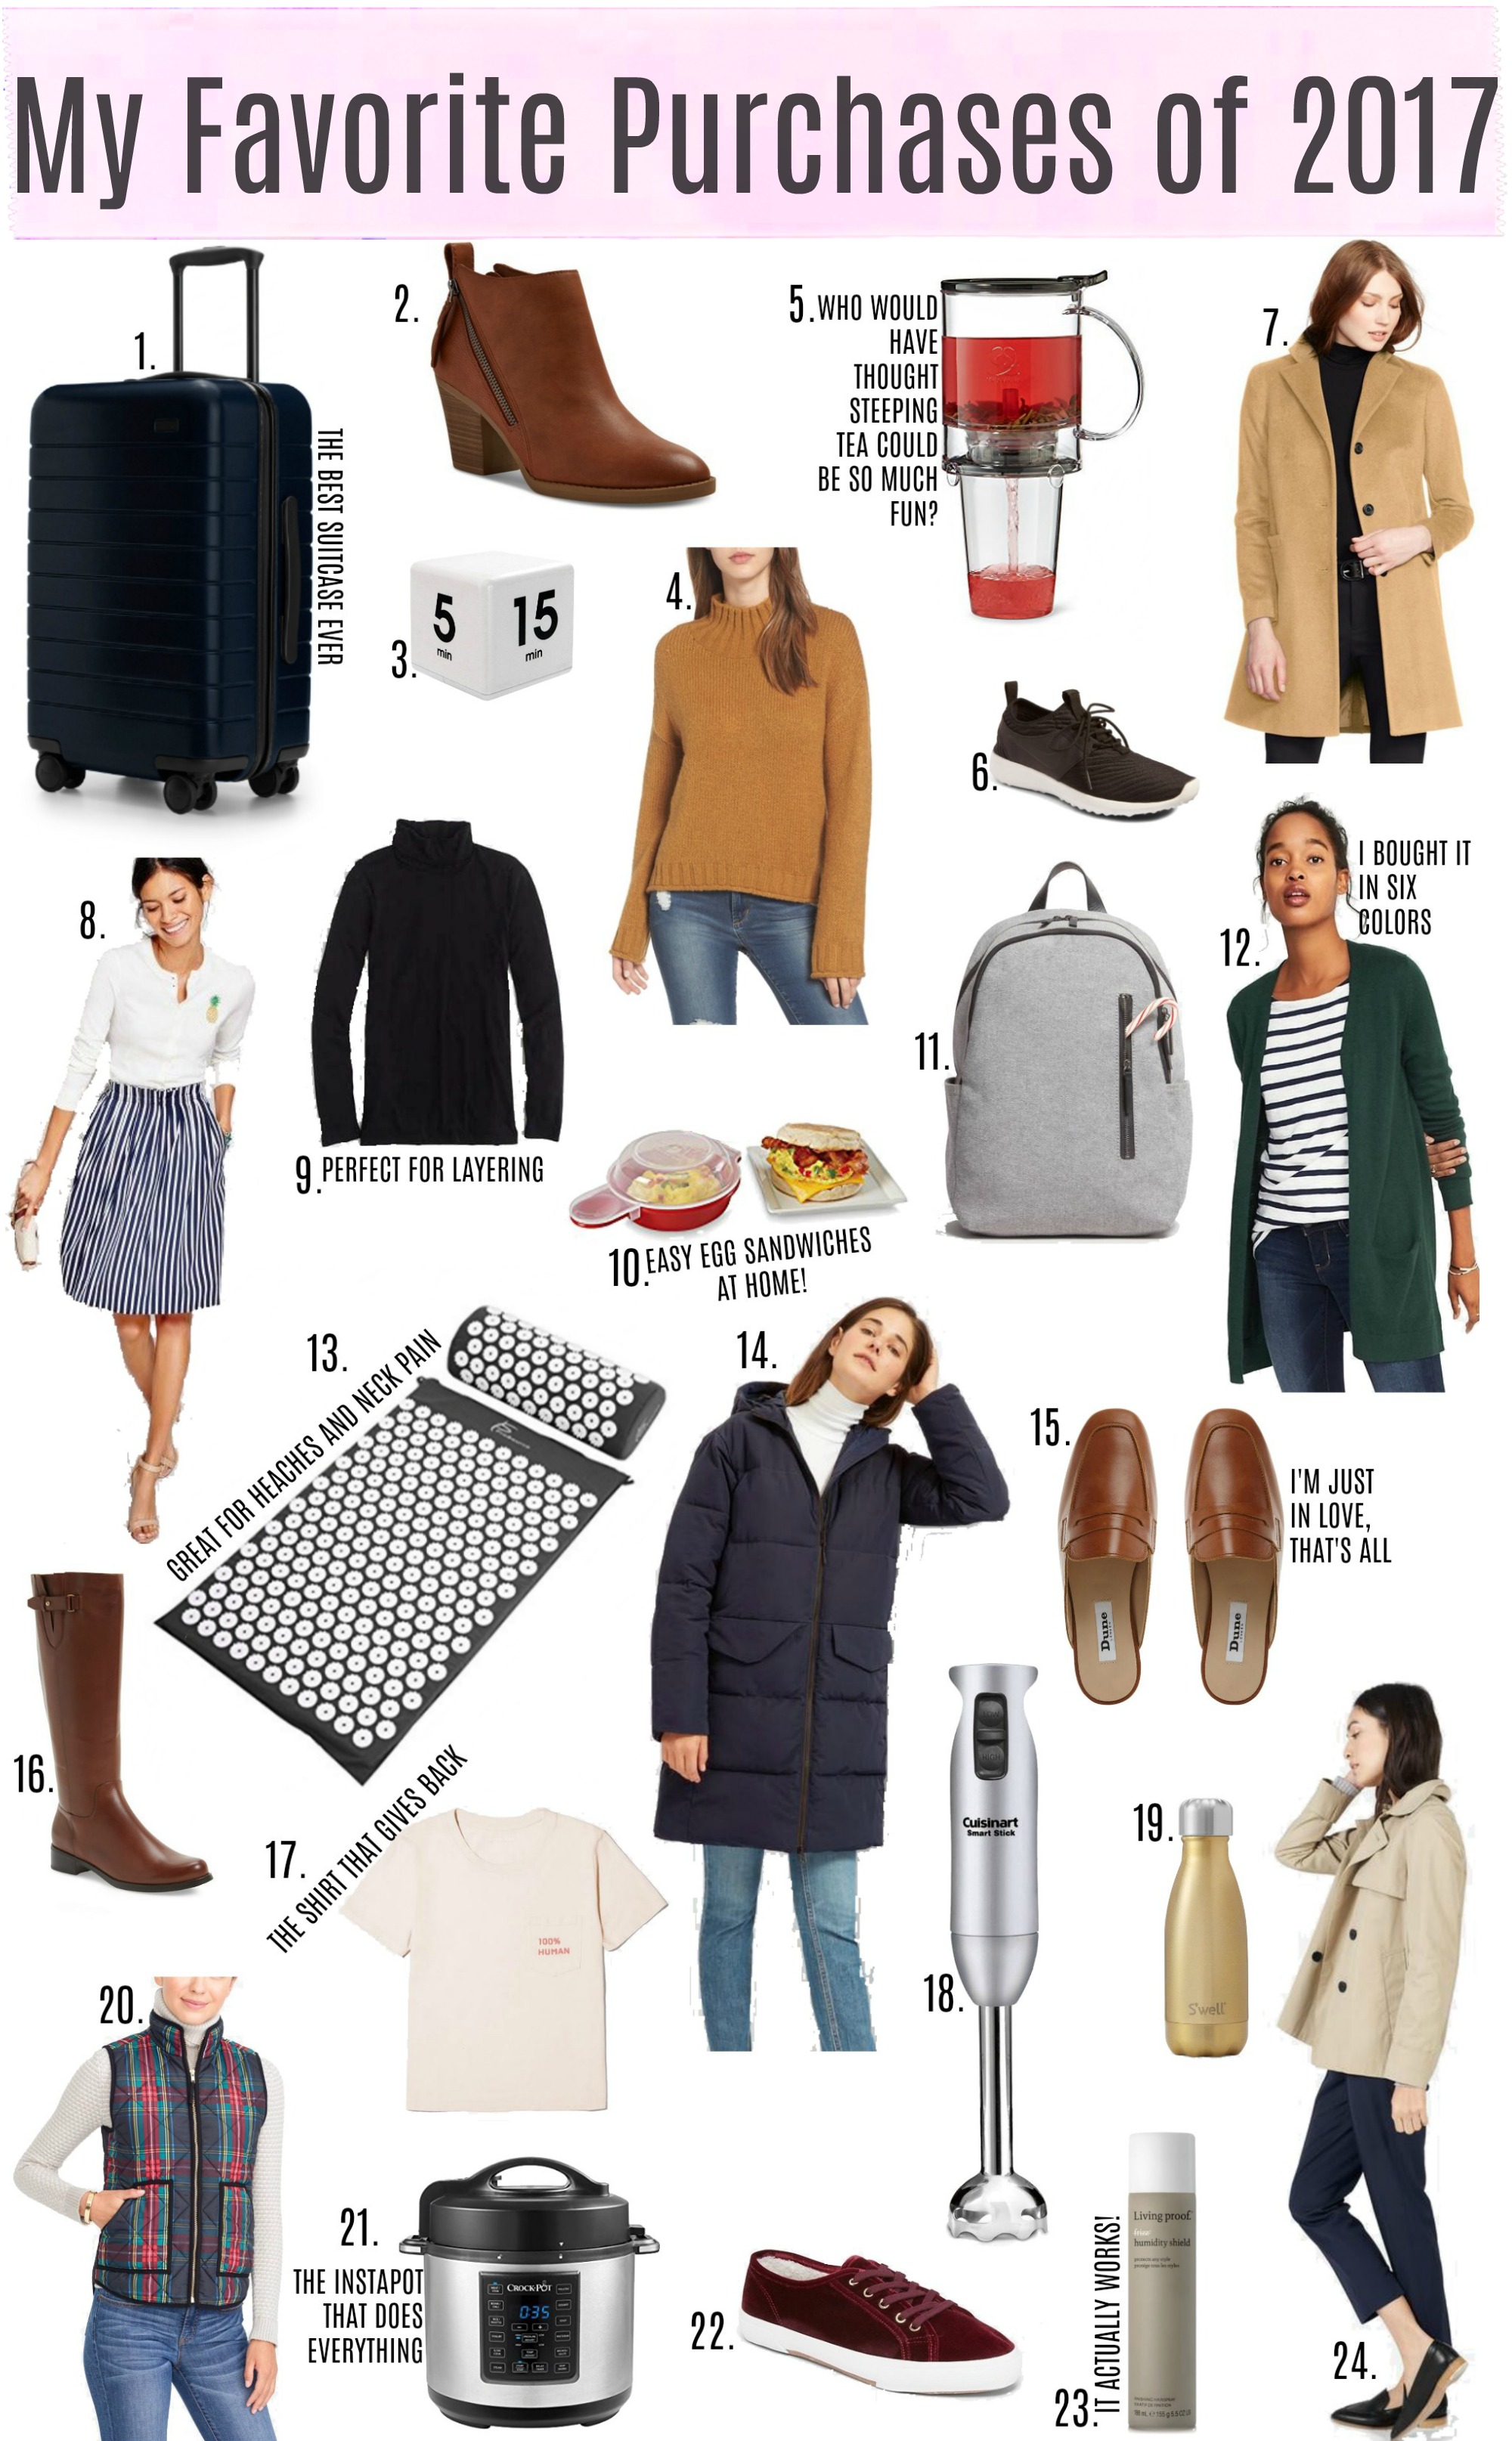 My Favorite Purchases of 2017 | Something Good, @danaerinw, Away Suitcase, dv Jameson Double Zip Booties, Timer, Bp. Cozy Mock Neck Sweater, Teavana Perfectea Maker, Nike Juvenate, Lauren Ralph Lauren Wool Blend Reefer Coat, J.Crew Factory Striped Skirt, J.Crew Tissue turtleneck T-shirt, Eggwich Maker, Everlane The Modern Commuter Backpack, Old Navy Open-Front Long-Line Sweater, Acupressure Mat, Everlane The Long Puffer Jacket, Dune Loafer, Blondo Volly Waterproof Riding Boot, Everlane The 100% Human Tee, Cuisinart Smart Stick Hand Blender, S'well 9 oz, J.Crew Factory Printed Quilted Puffer Vest, Pressure Cooker / Slow Cooker / InsaPot, Old Navy Velvet Sneakers, Living Proof No Frizz Humidity Shield, Everlane Swing Trench 